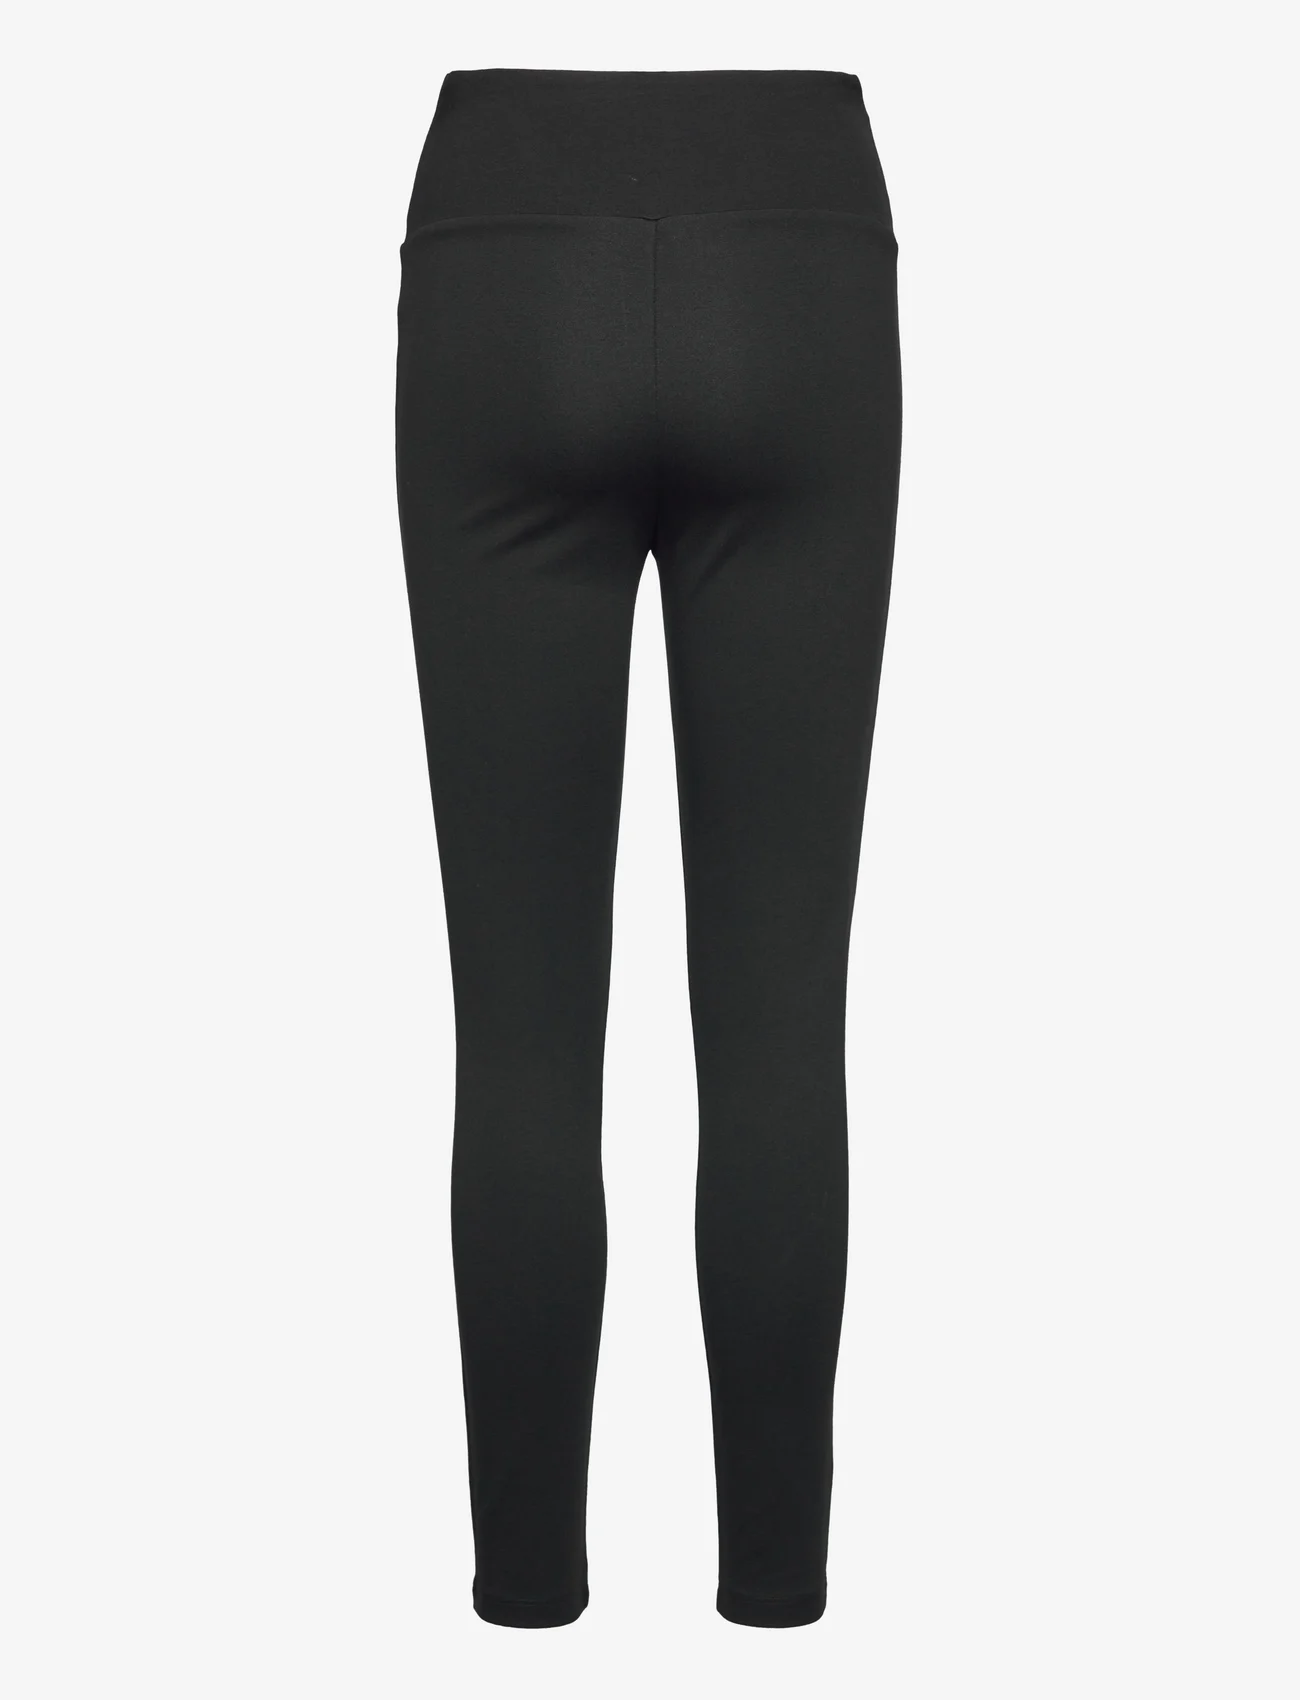 Esprit Collection - Pants knitted - sportleggings - black - 1